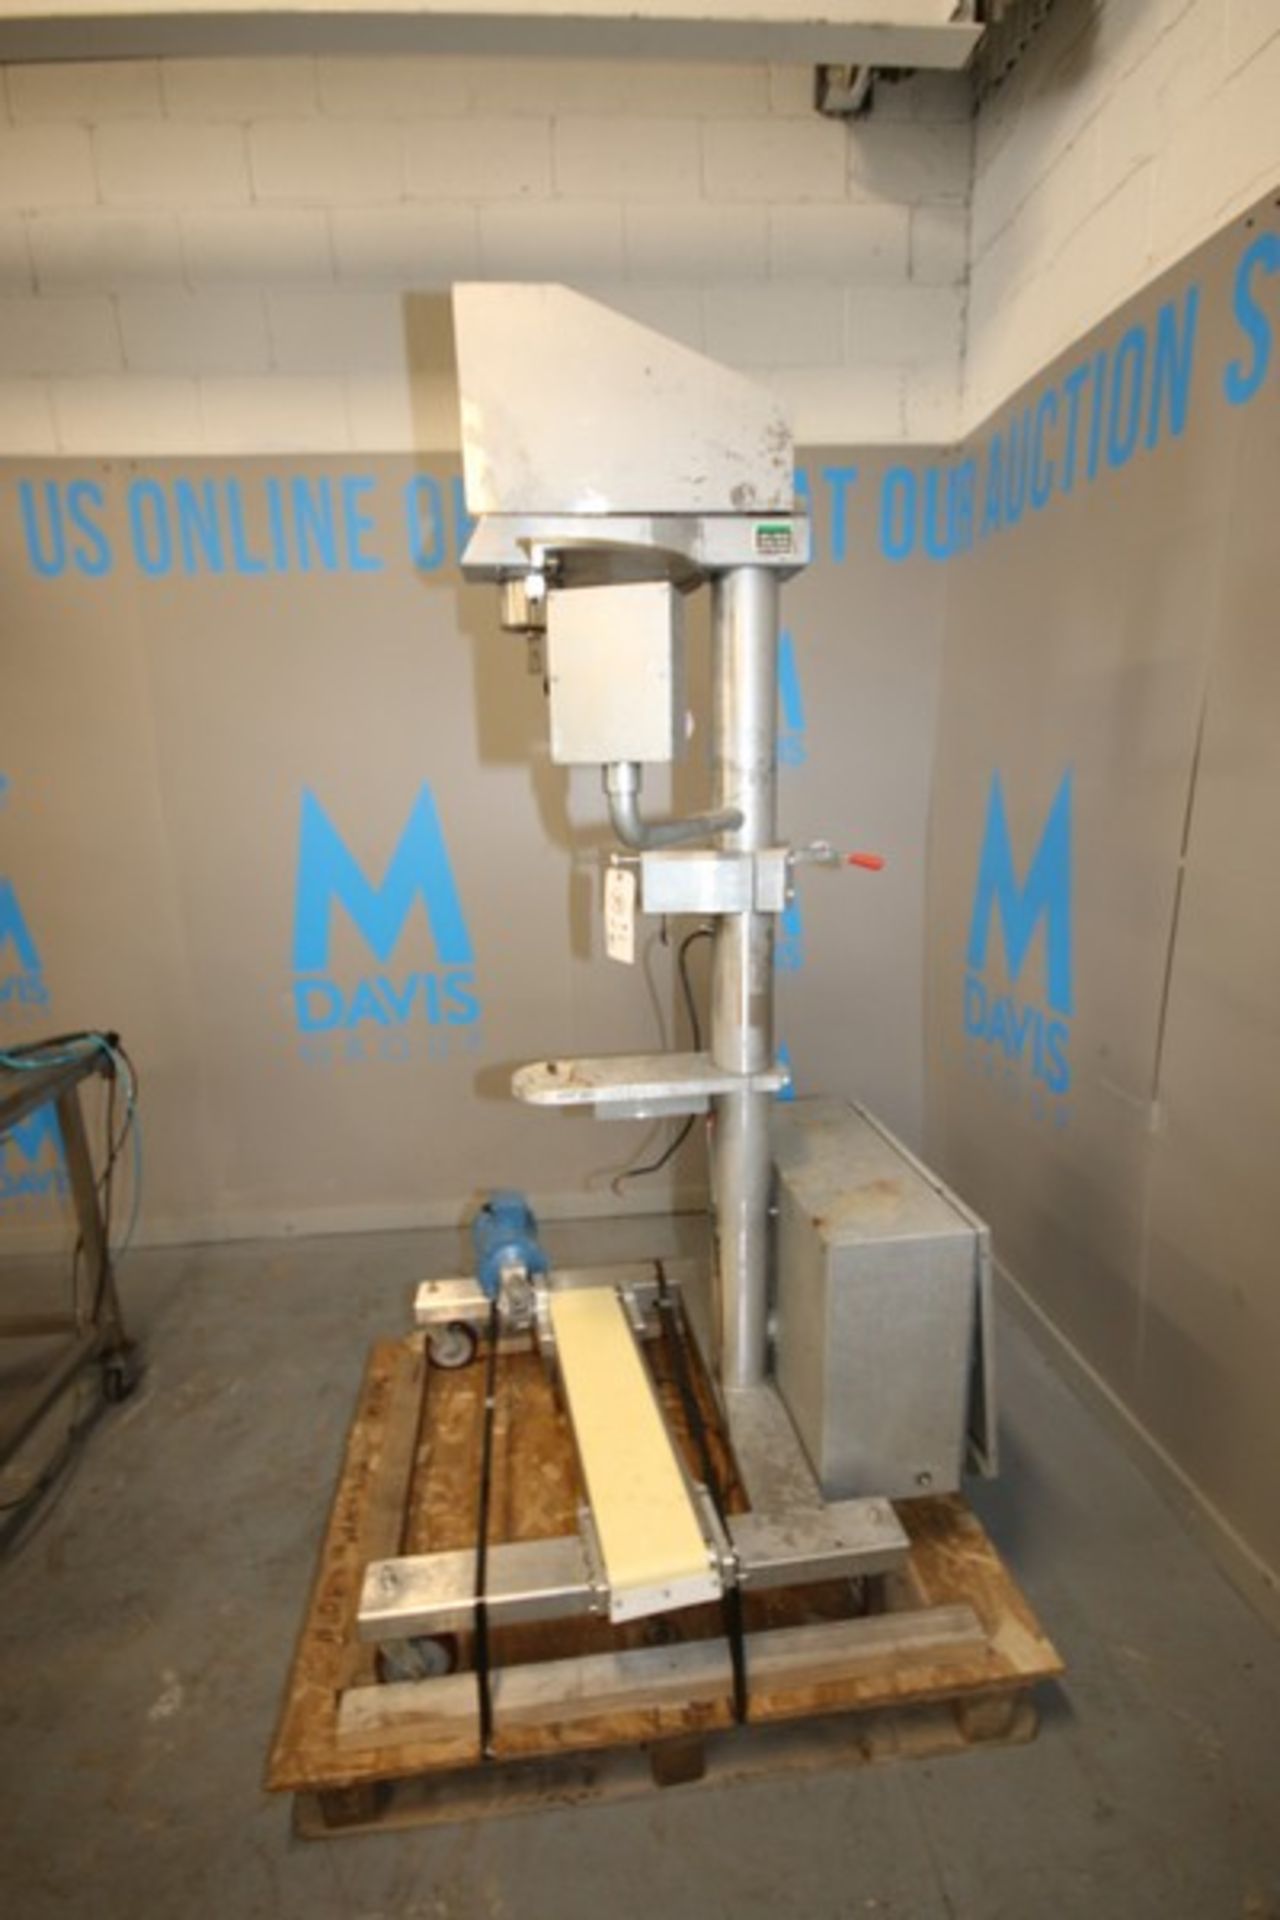 Arcobaleno S/S Auger Filler,M/N FS1000, S/N 10844, 230 Volts, 3 Phase, with Straight Section of - Image 3 of 15